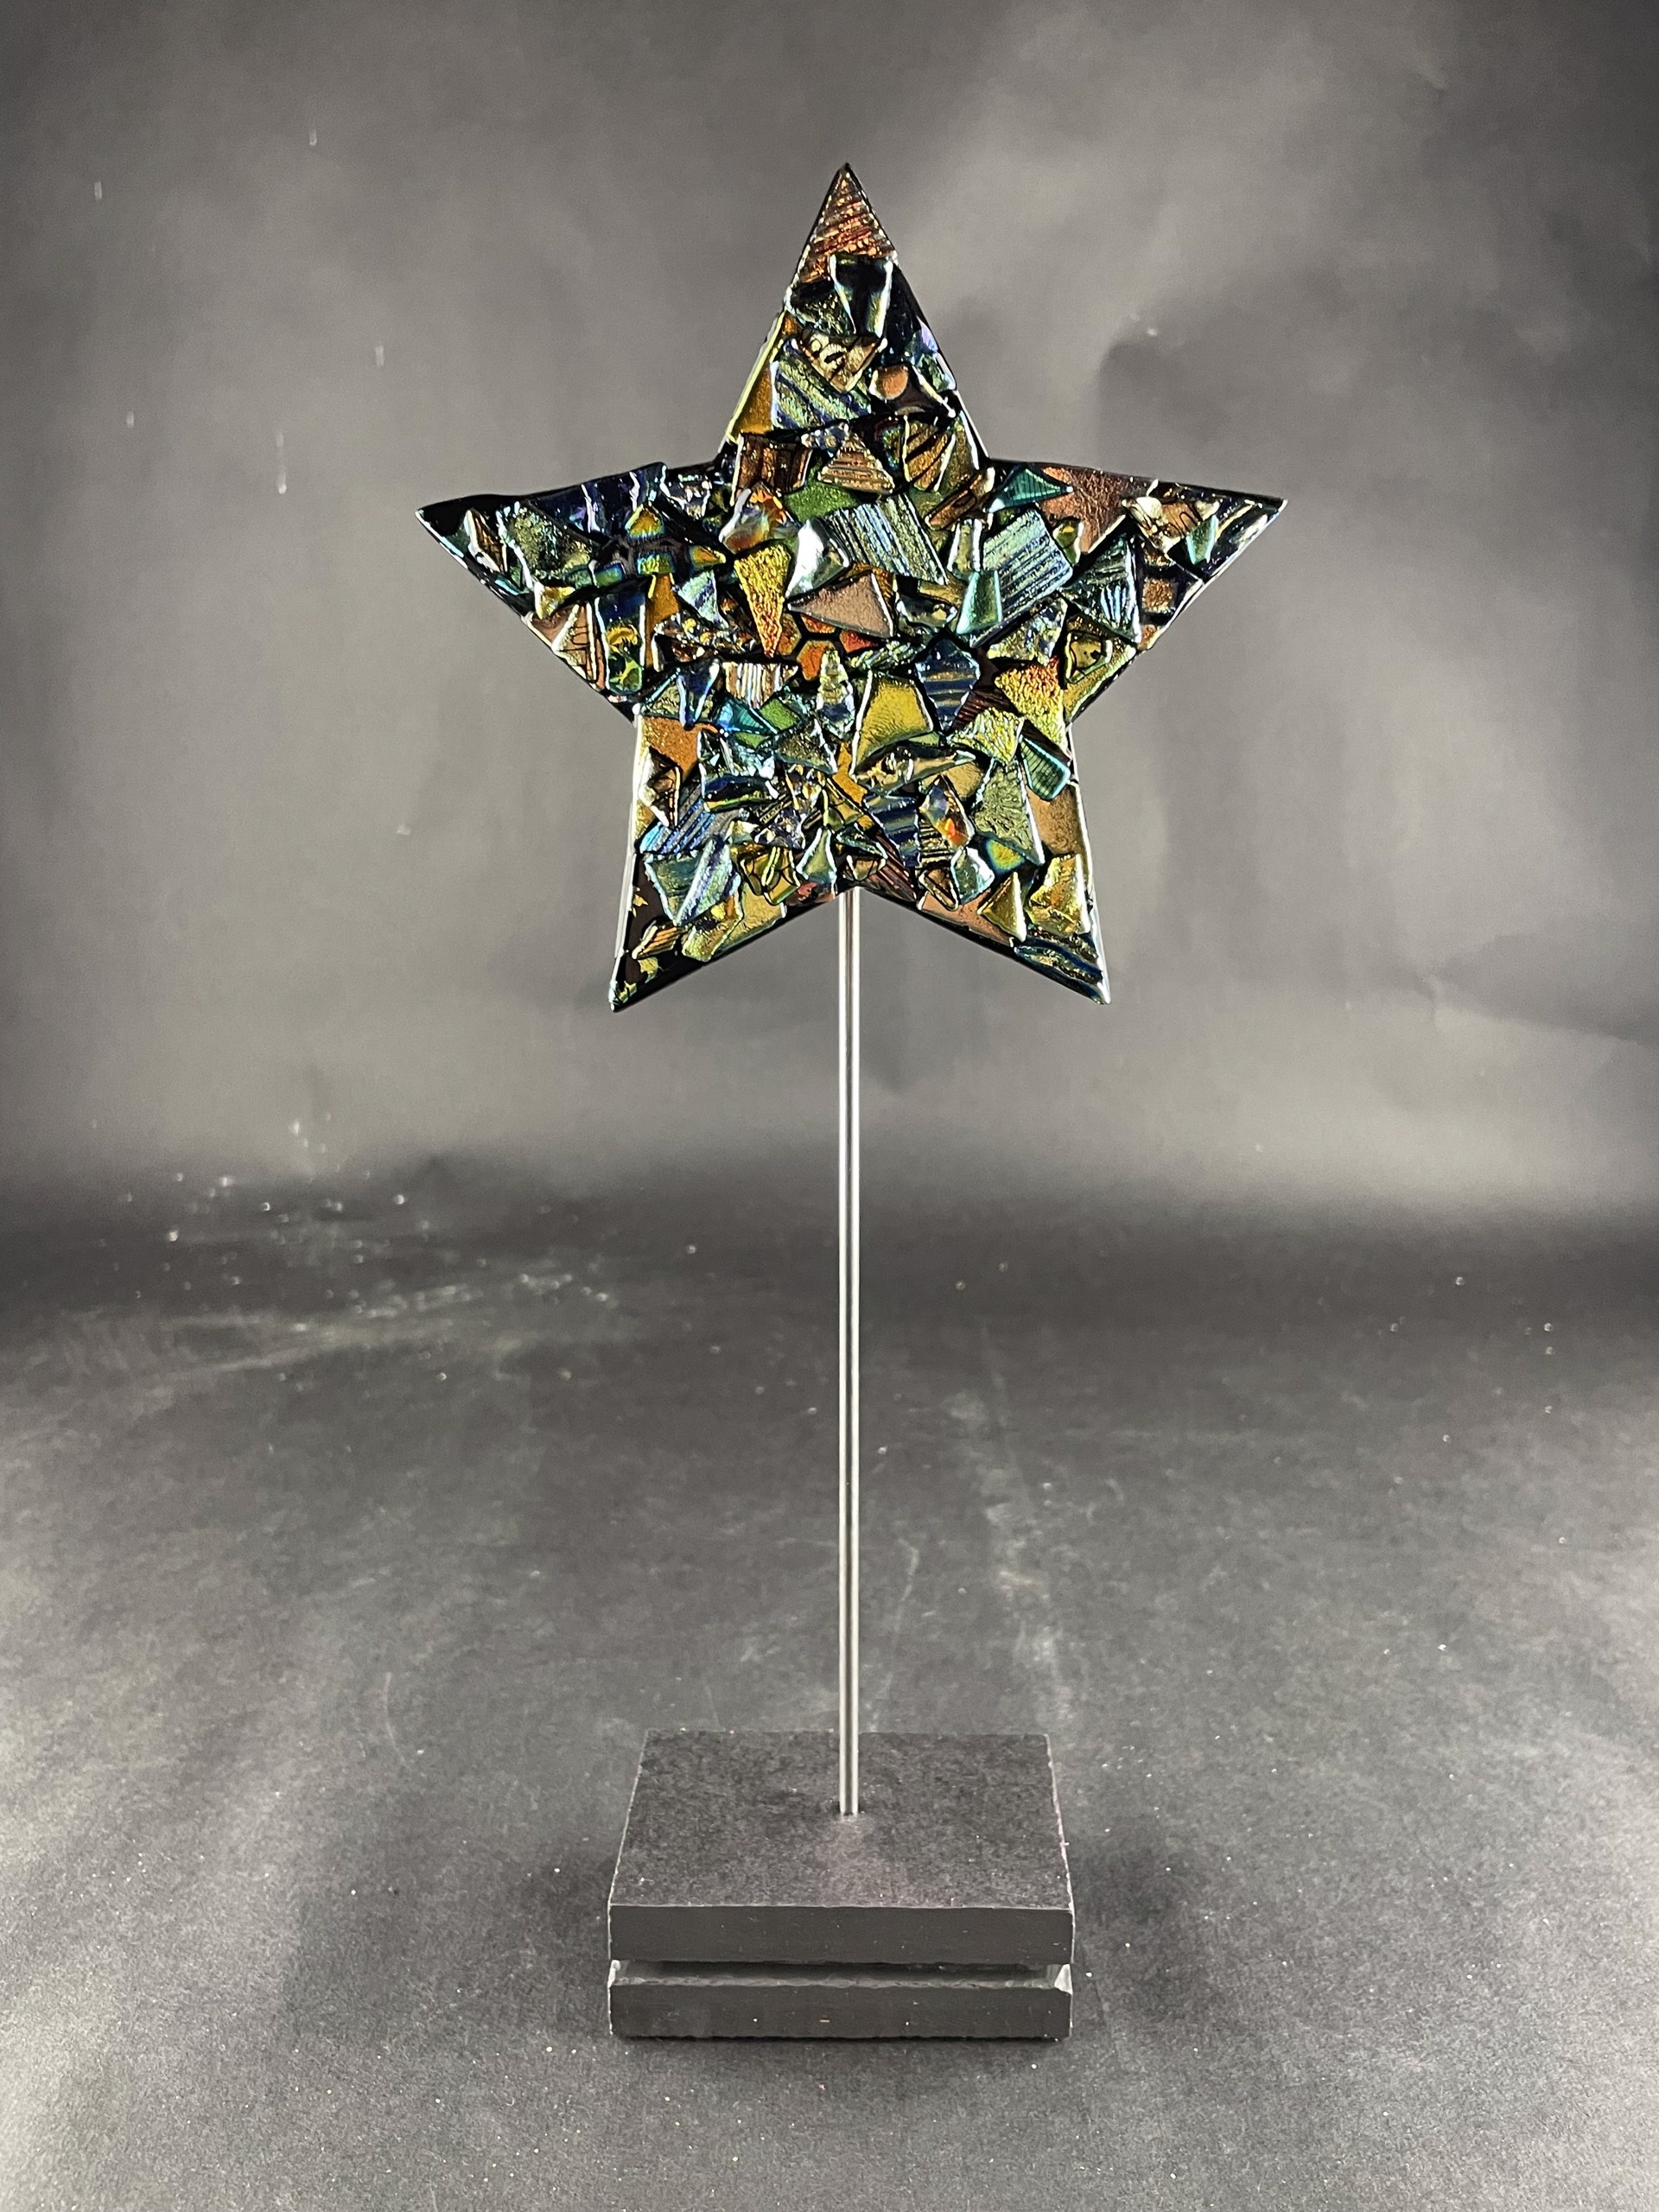 Star on Stand IV by Doug and Barbara Henderson